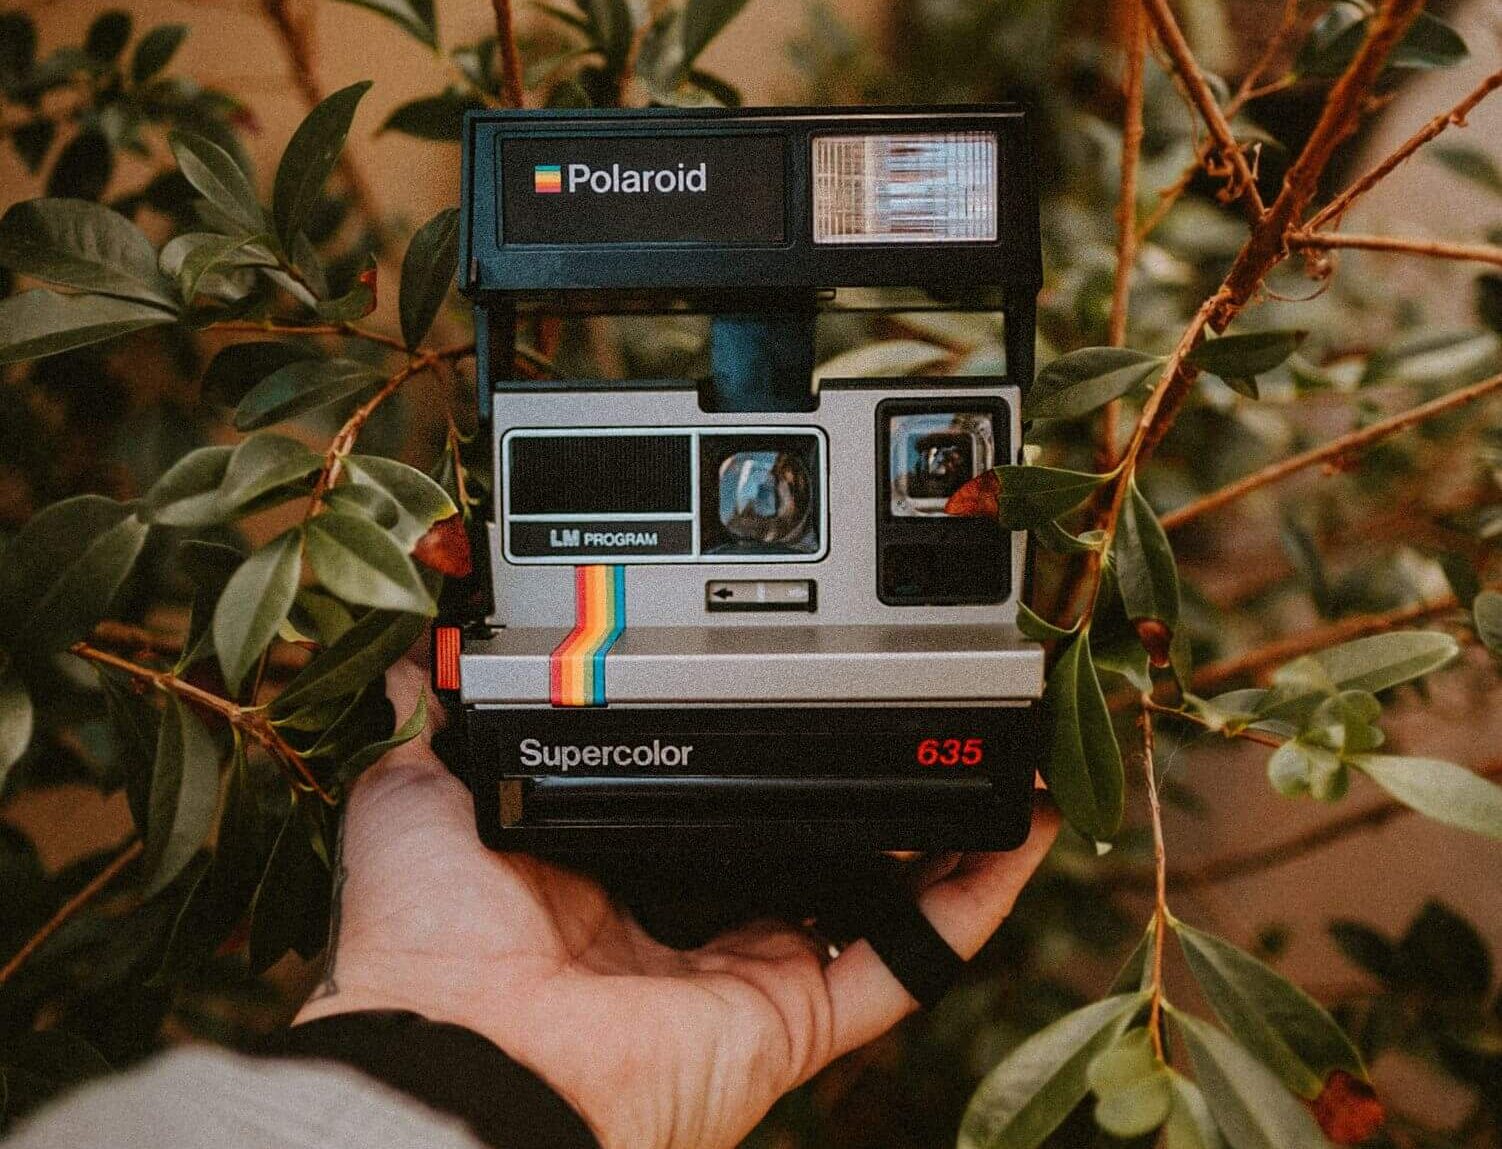 guy holding out a vintage polaroid 600 camera